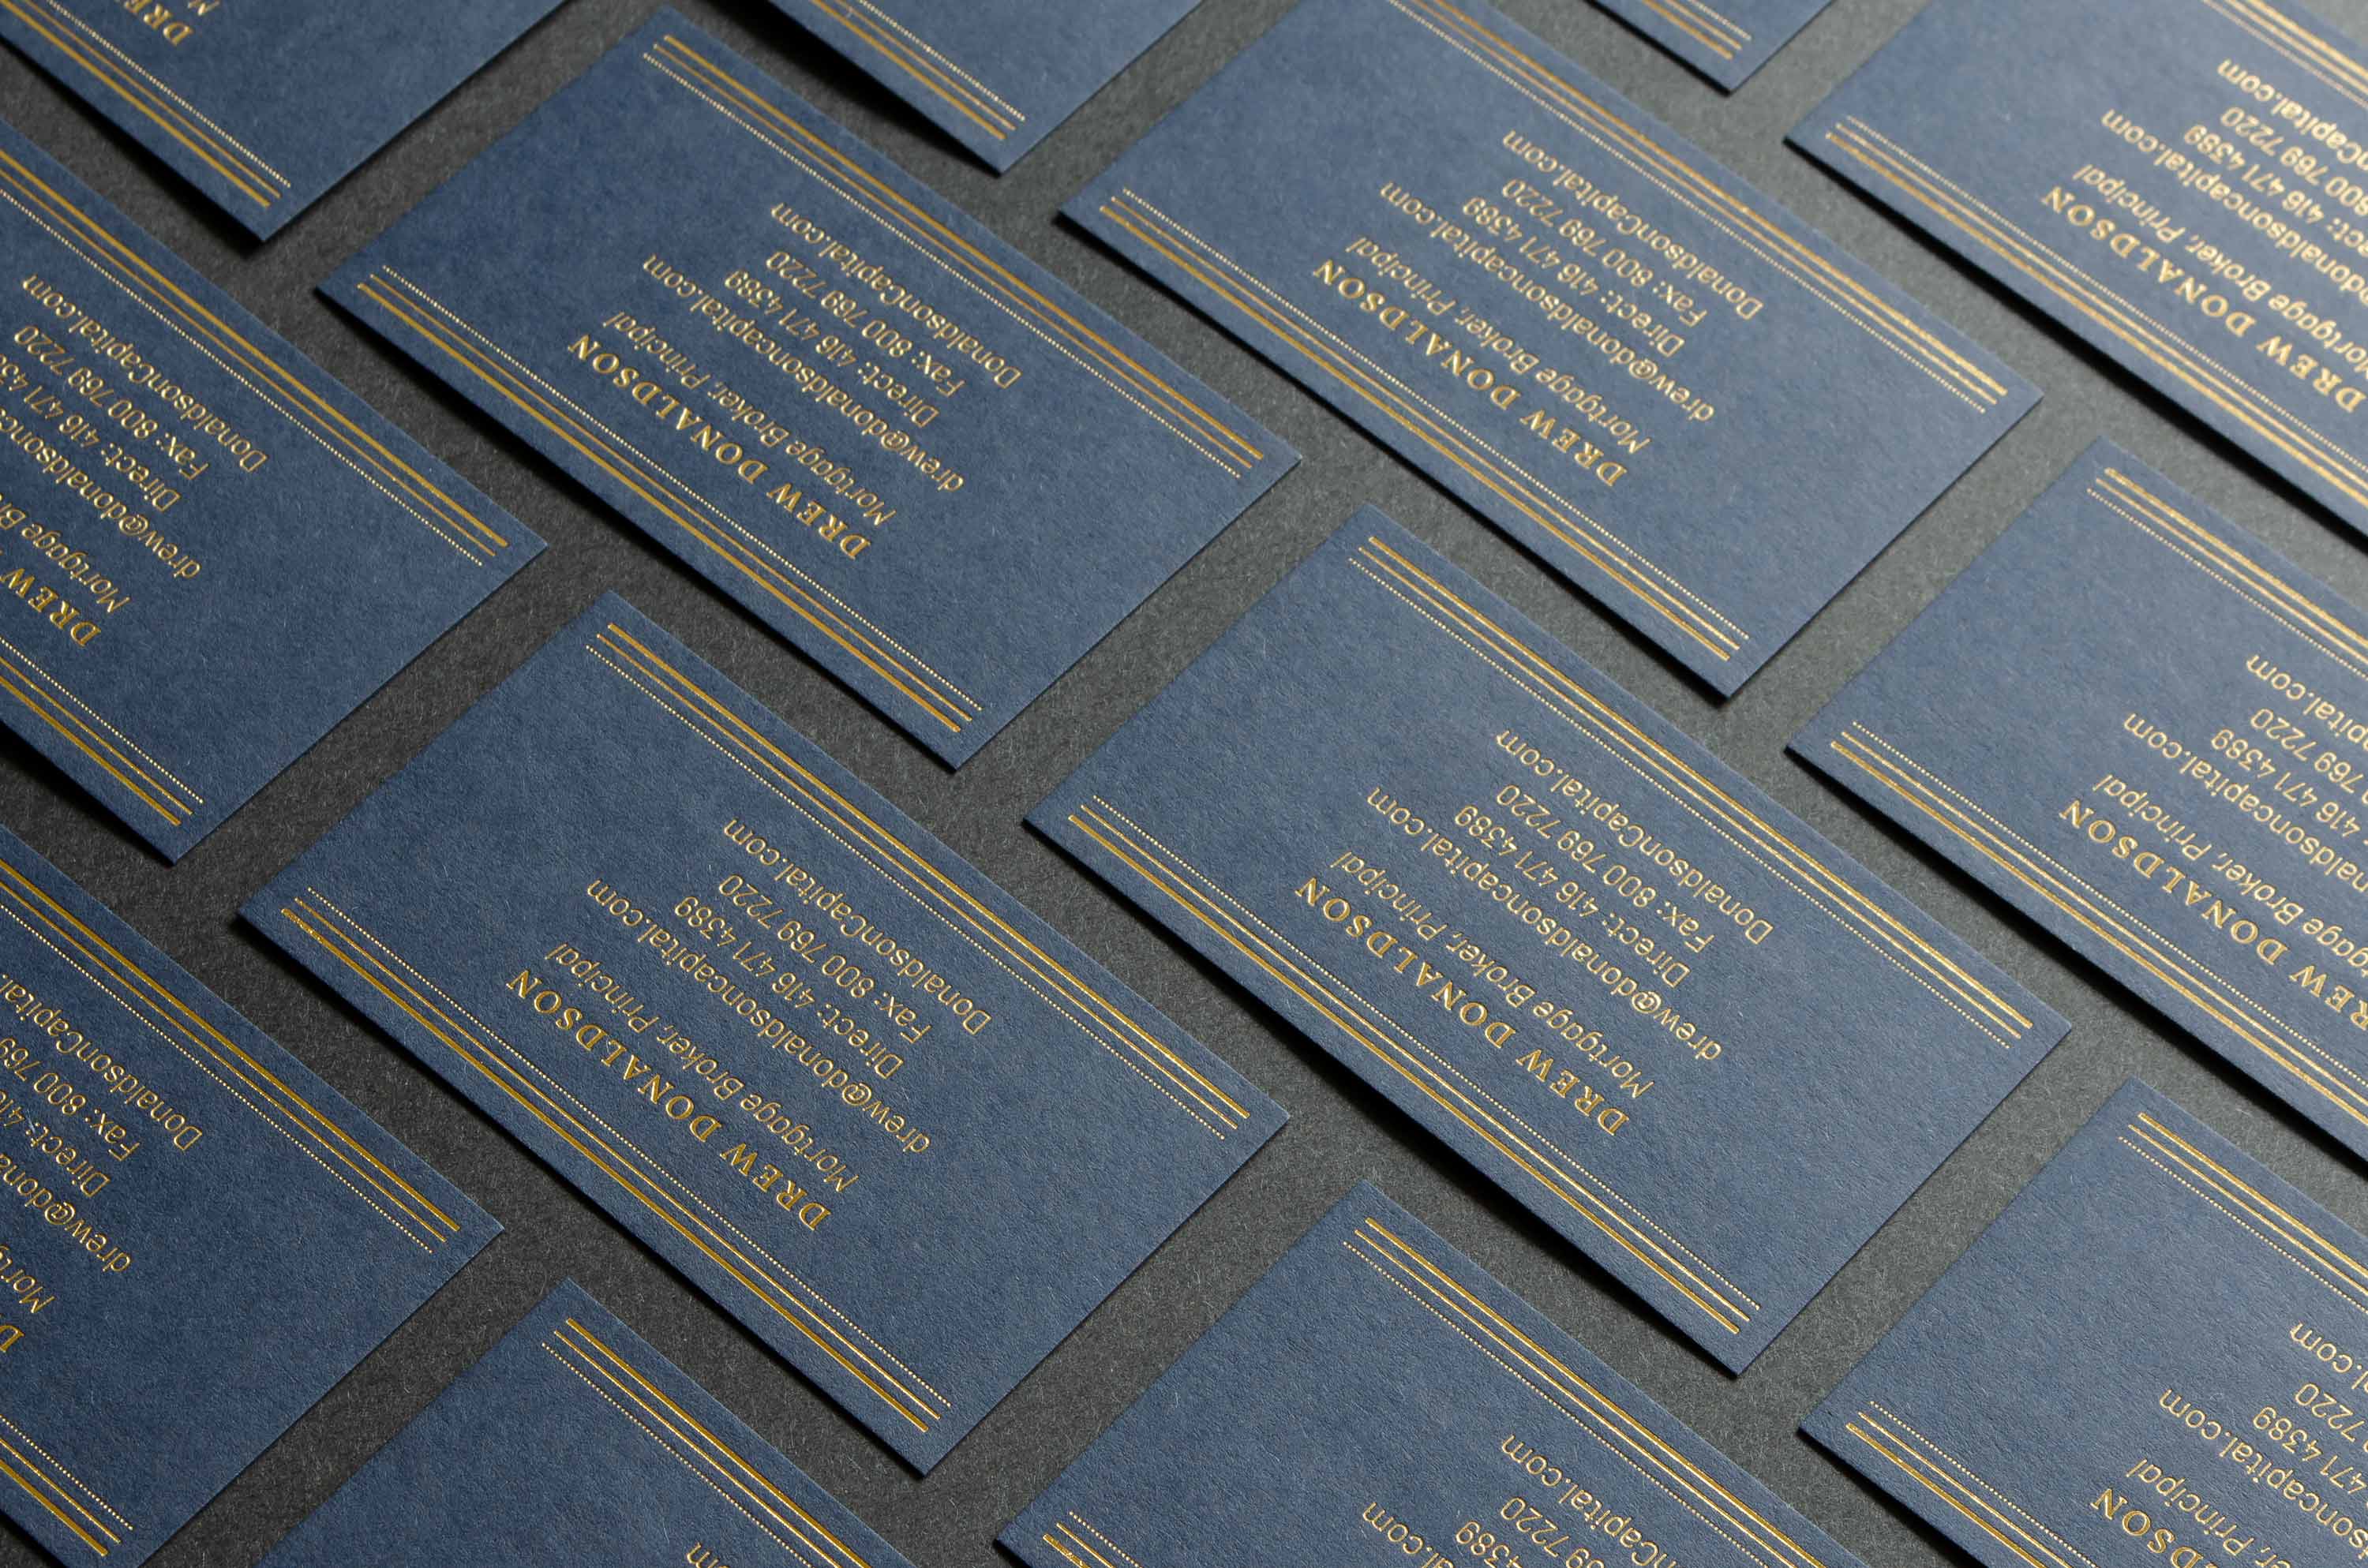 Multiple foil stamped custom branded business card design by Karbon Branding for Donaldson Capital, mortgage firm in Toronto, Canada.